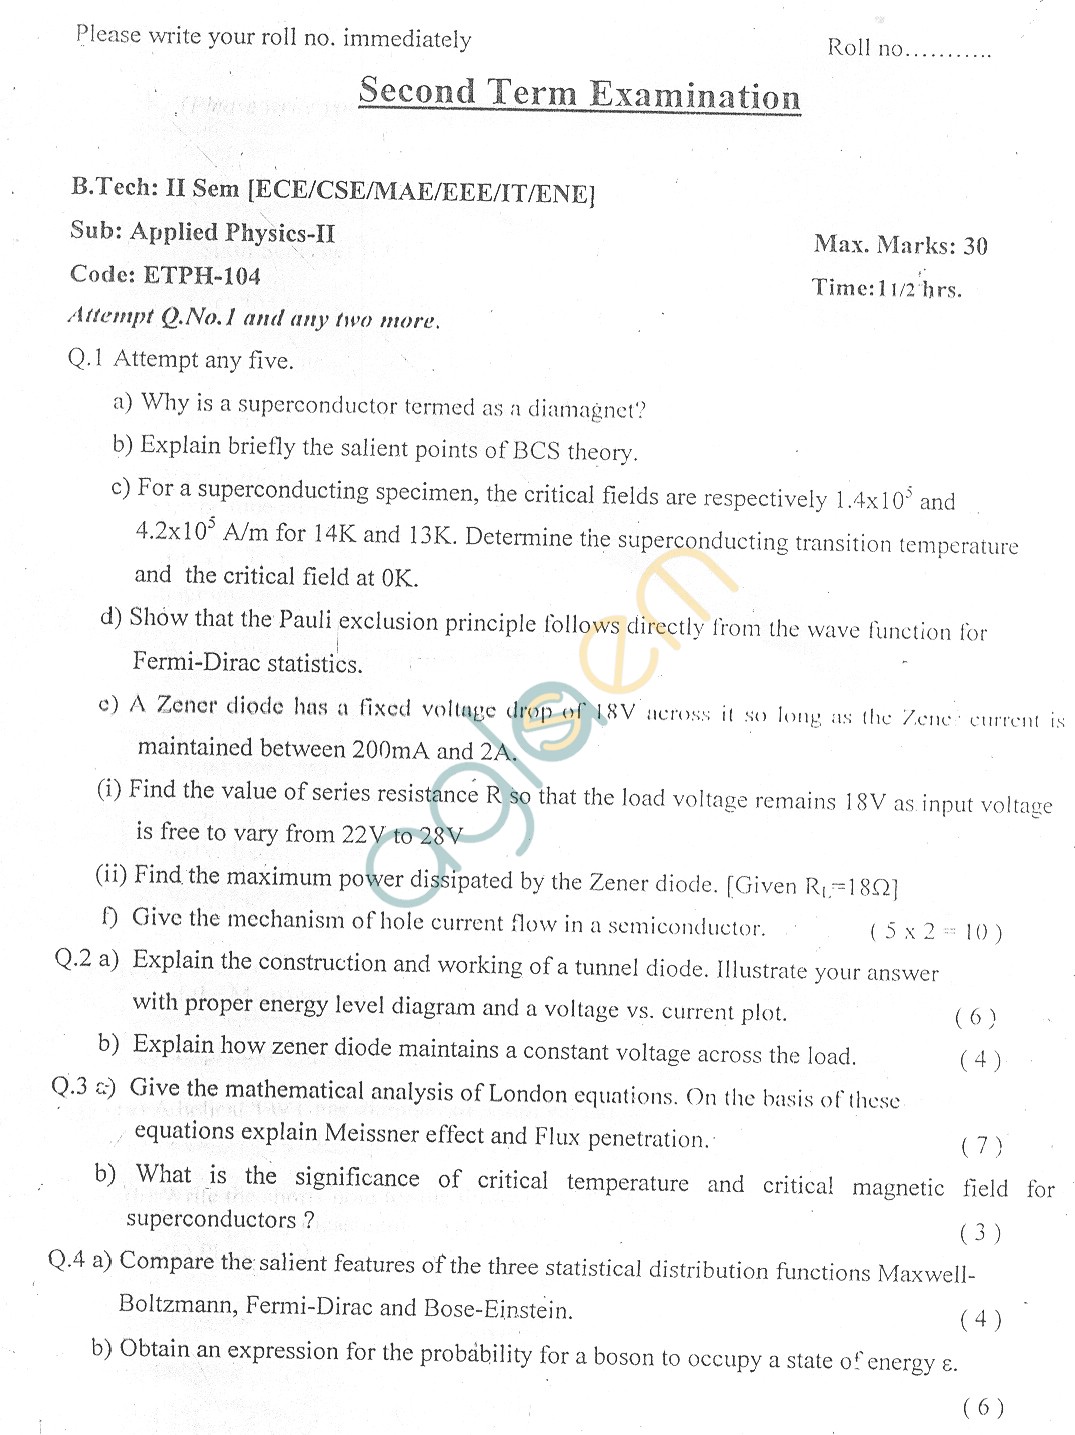 GGSIPU Question Papers Second Semester – Second Term 2006 – ETPH-104